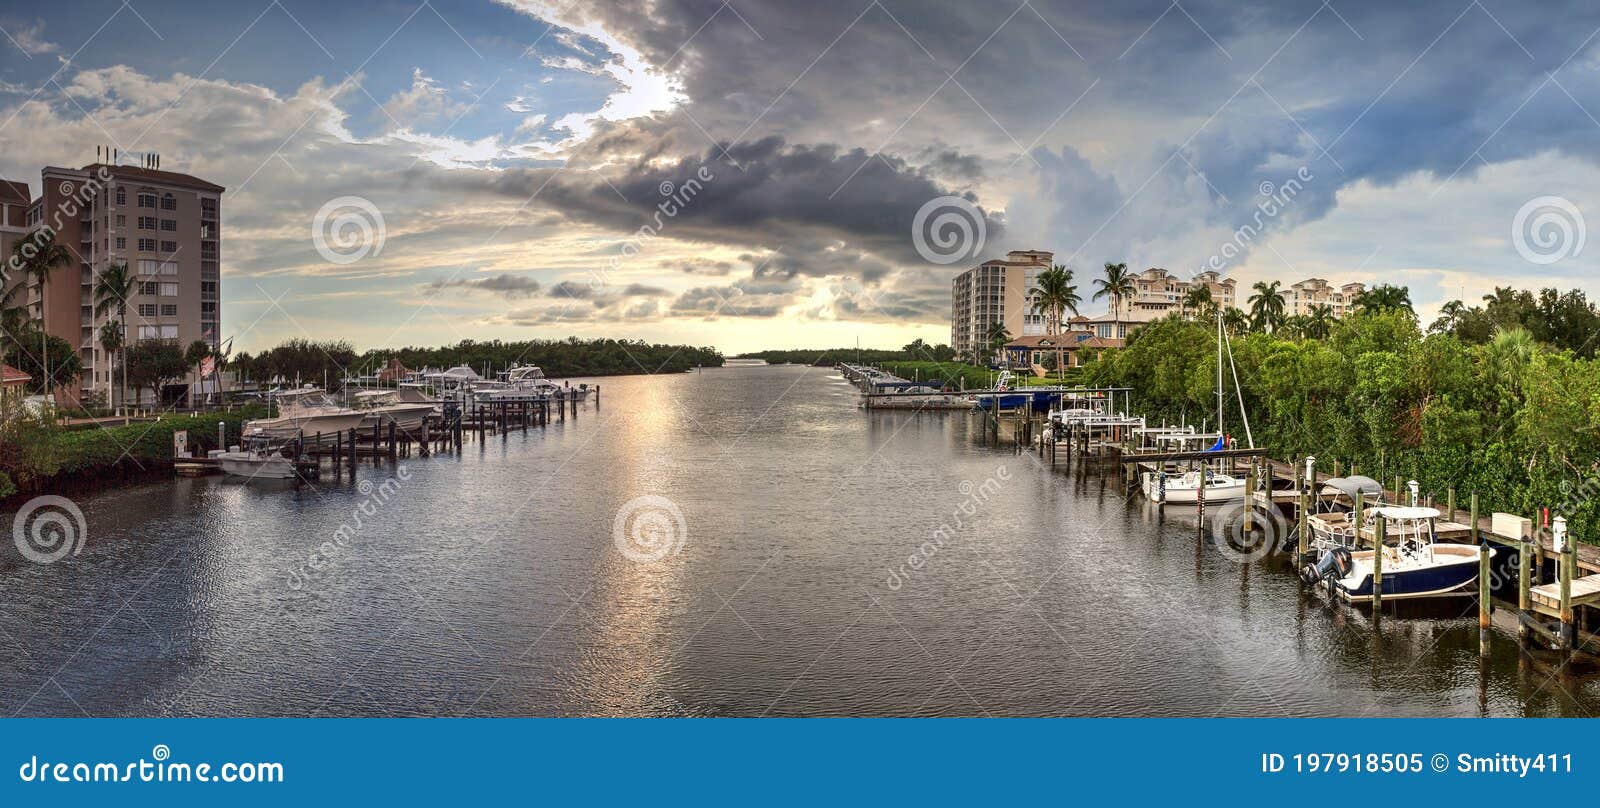 boats docked in a harbor along the cocohatchee river in bonita springs